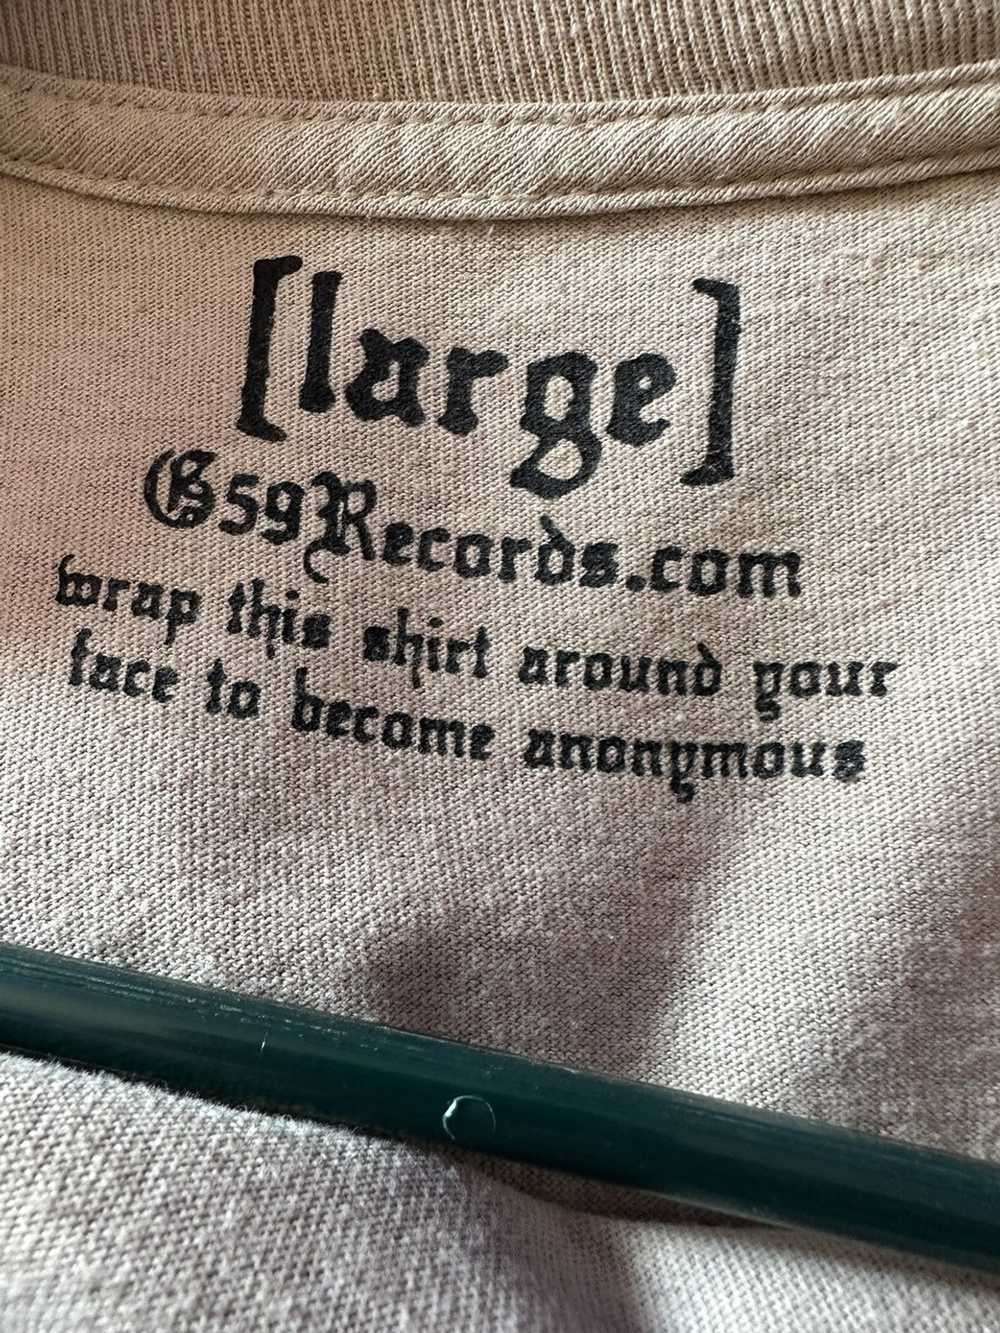 G59 Records RARE G59 Robbery Tee From 2016! - image 4